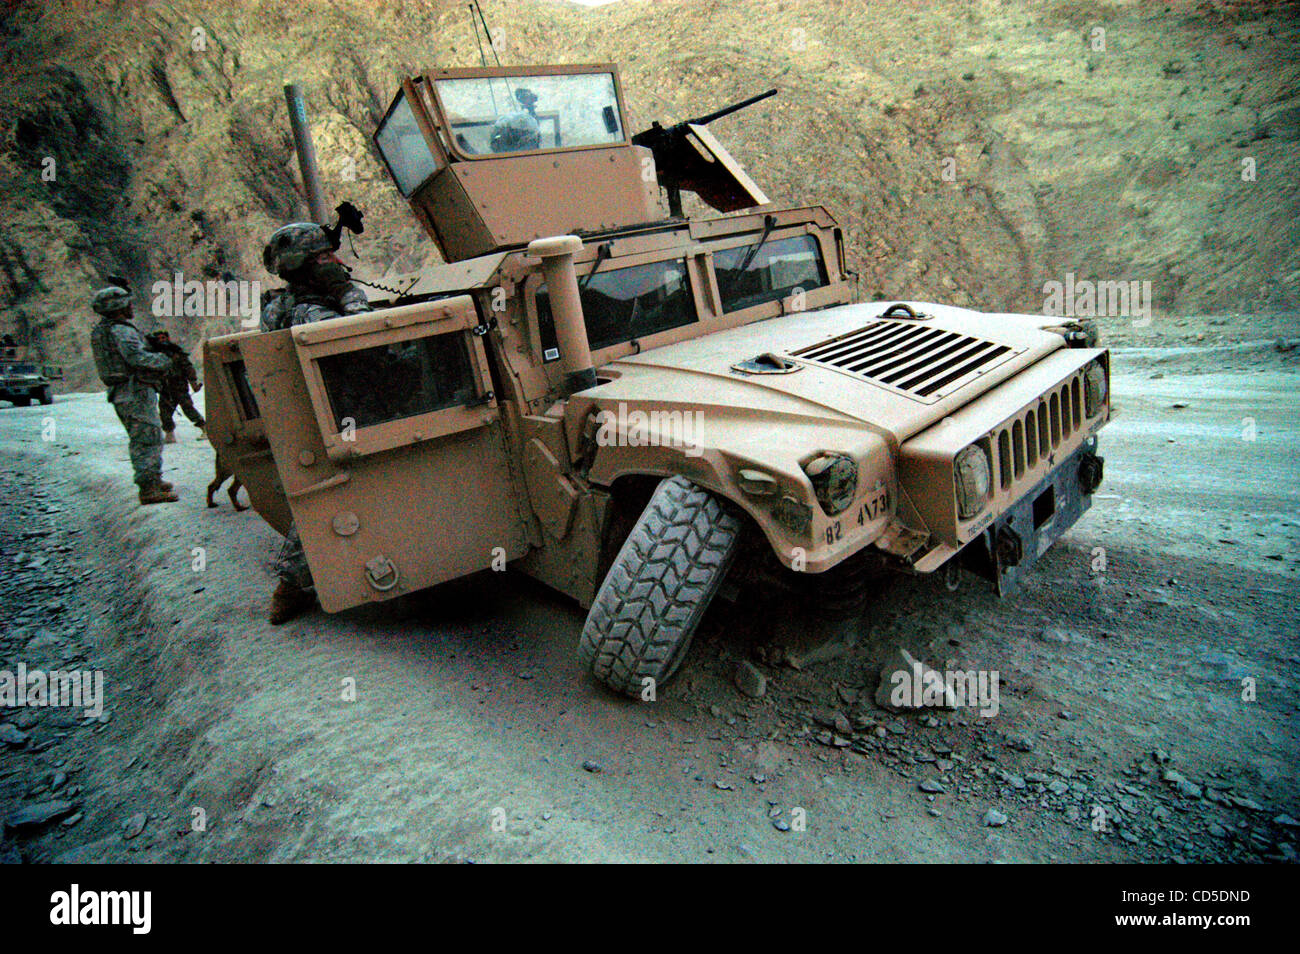 Apr 25, 2008 - Paktya Province, Afghanistan - One of the Charlie Co, 1-61 Cav, 4th BCT, 101st Abn, half-dozen Humvees on an evening patrol in eastern Afghanistan disabled with a severed axle arm. (Credit Image: © Paul Avallone/ZUMA Press) Stock Photo